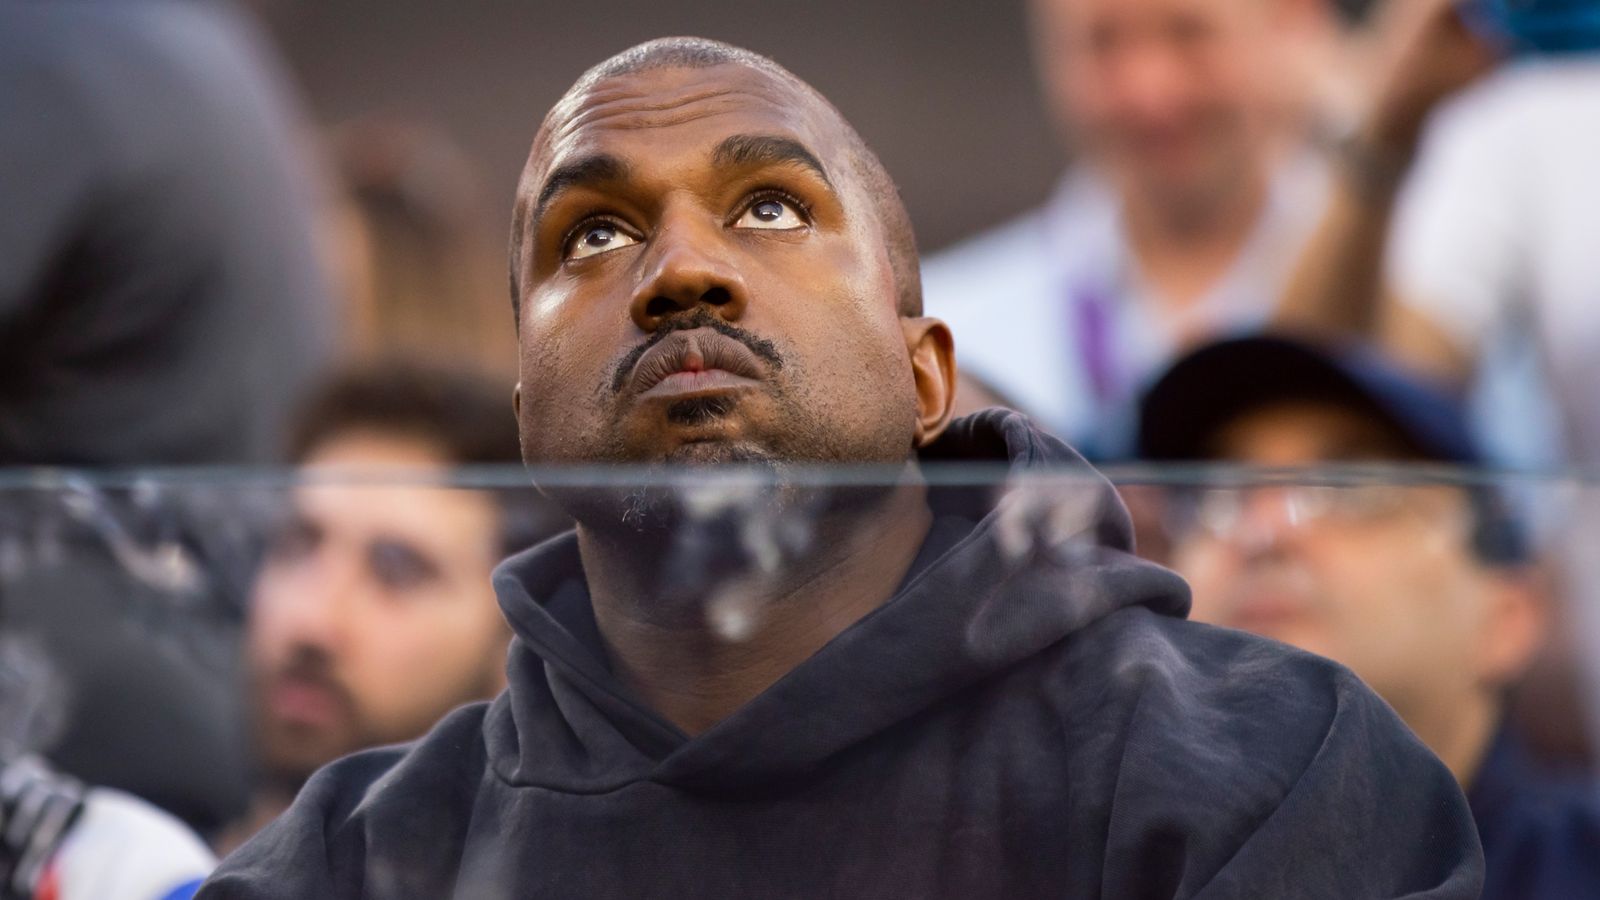 Adidas to sell Yeezy designs under new name after Kanye West split